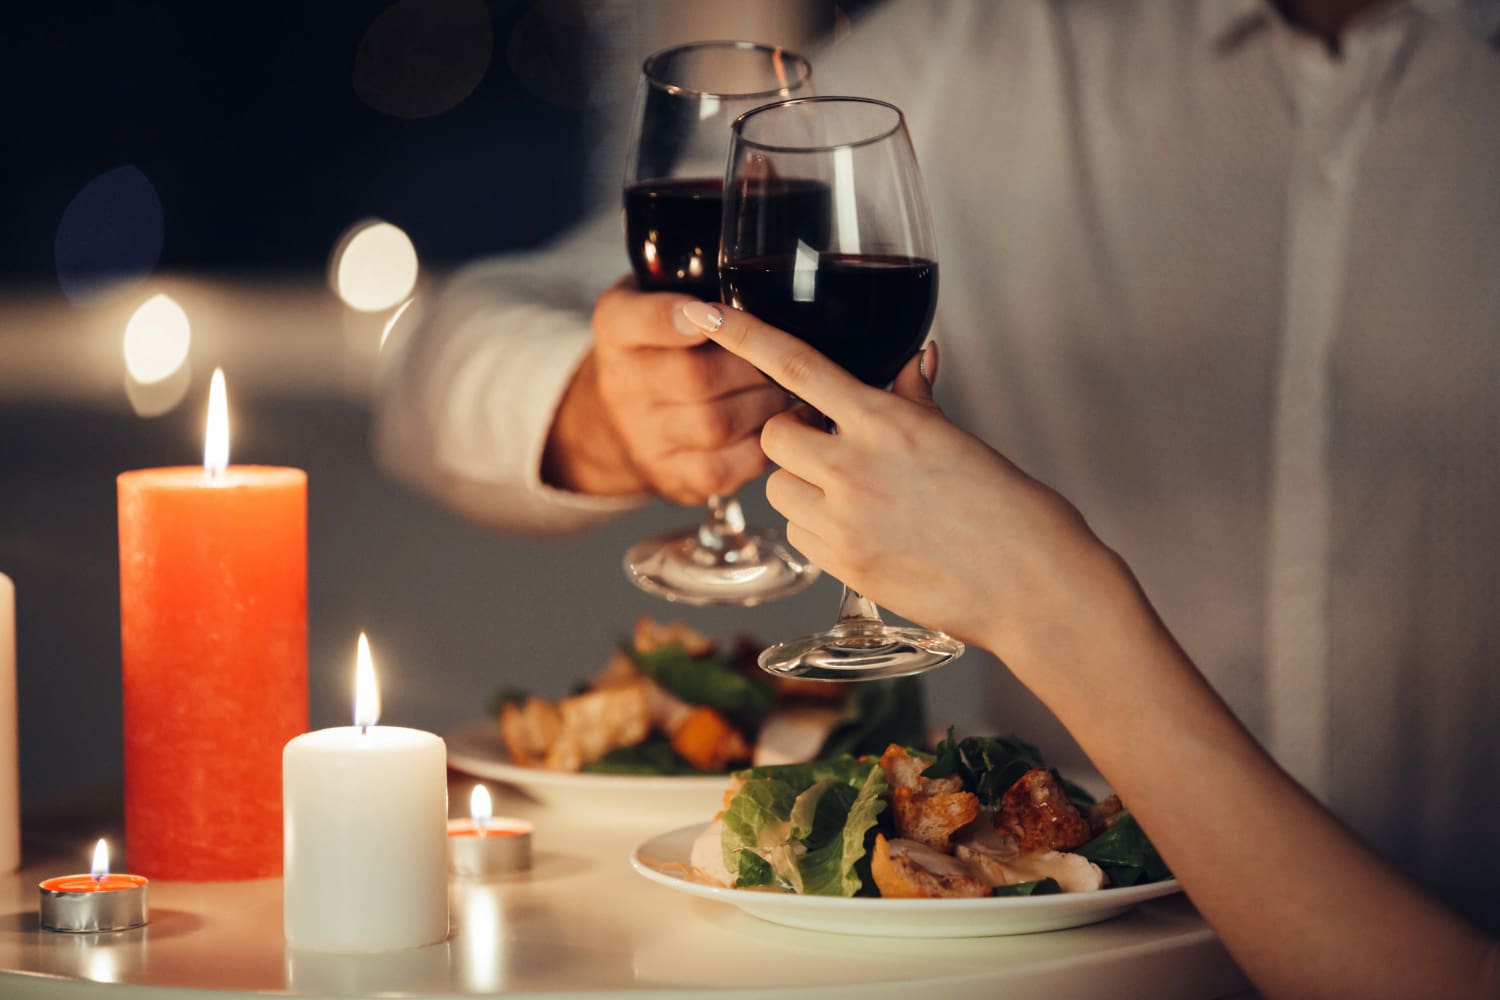 A couple toasting with wine glasses during a candlelit dinner.